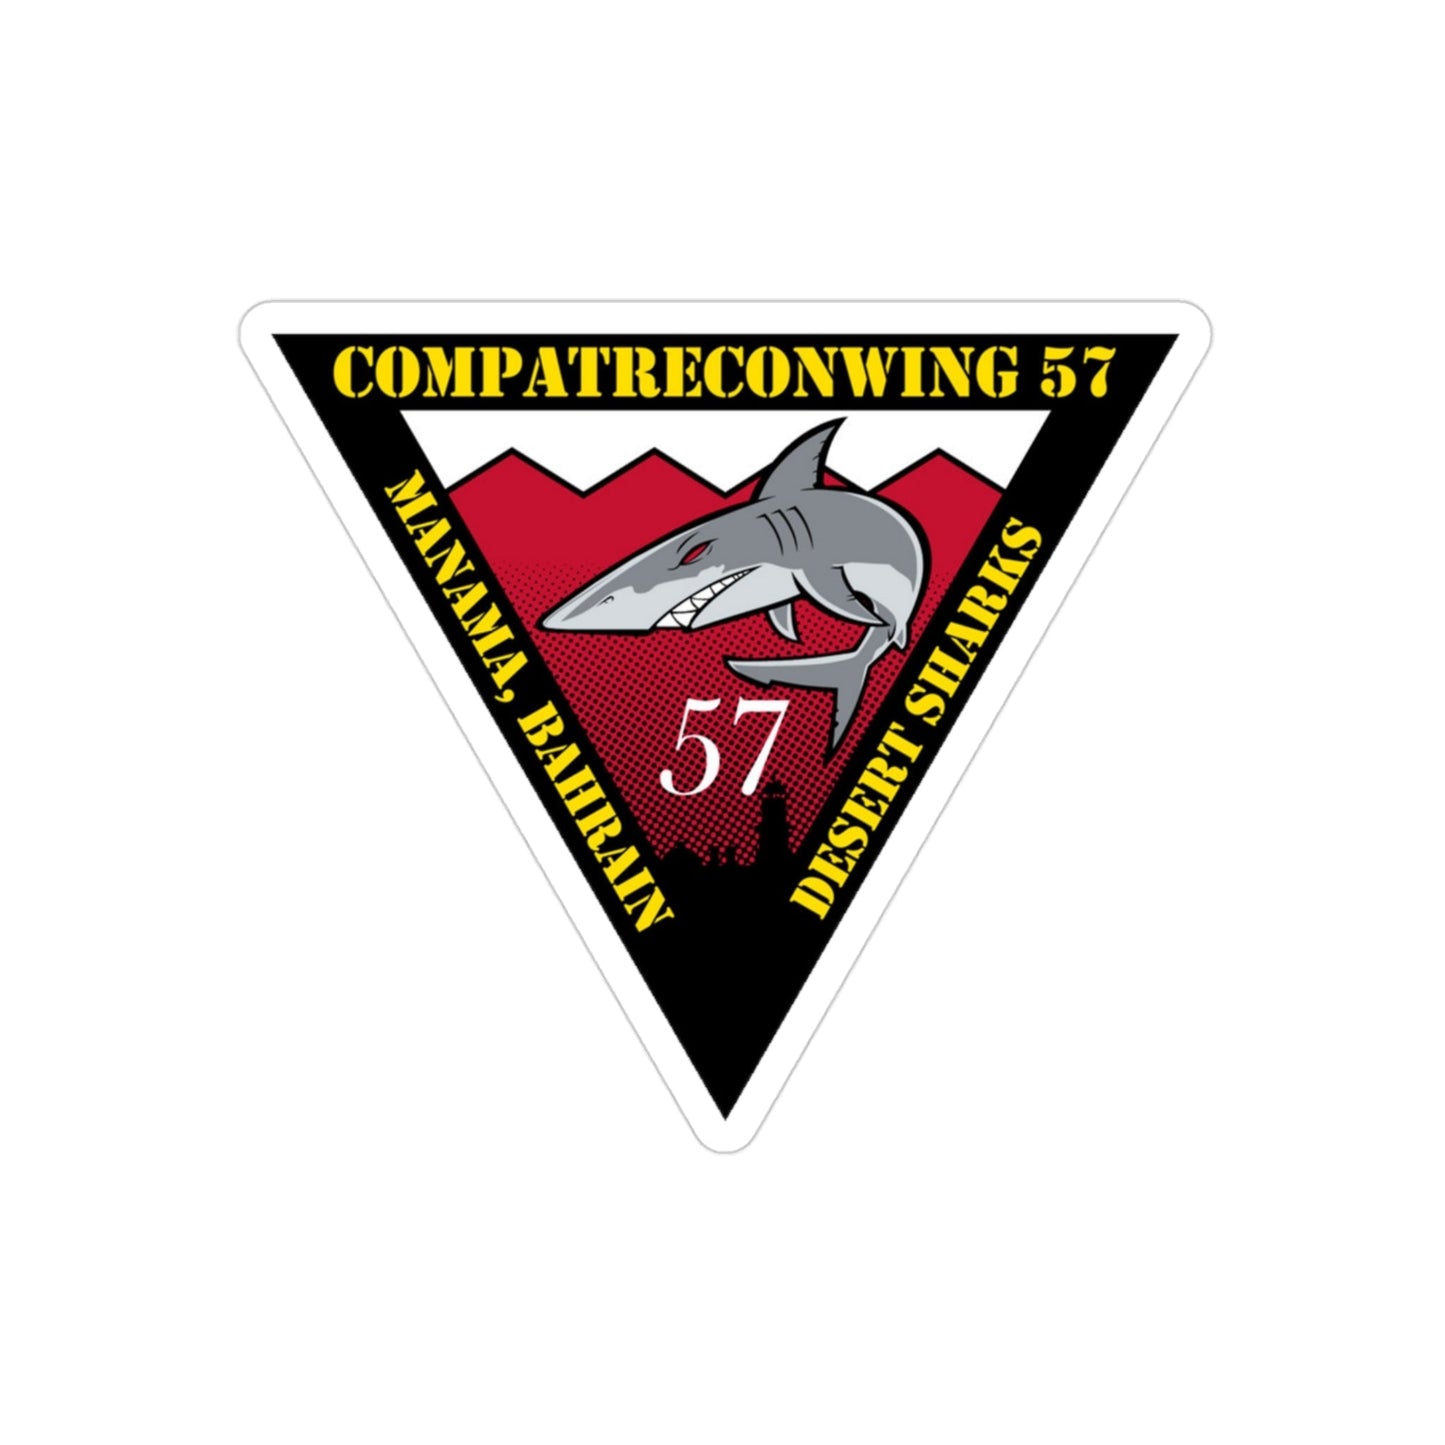 COMPATRECONWING 57 Commander Patrol and Reconnaissance Wing 57 (U.S. Navy) Transparent STICKER Die-Cut Vinyl Decal-3 Inch-The Sticker Space